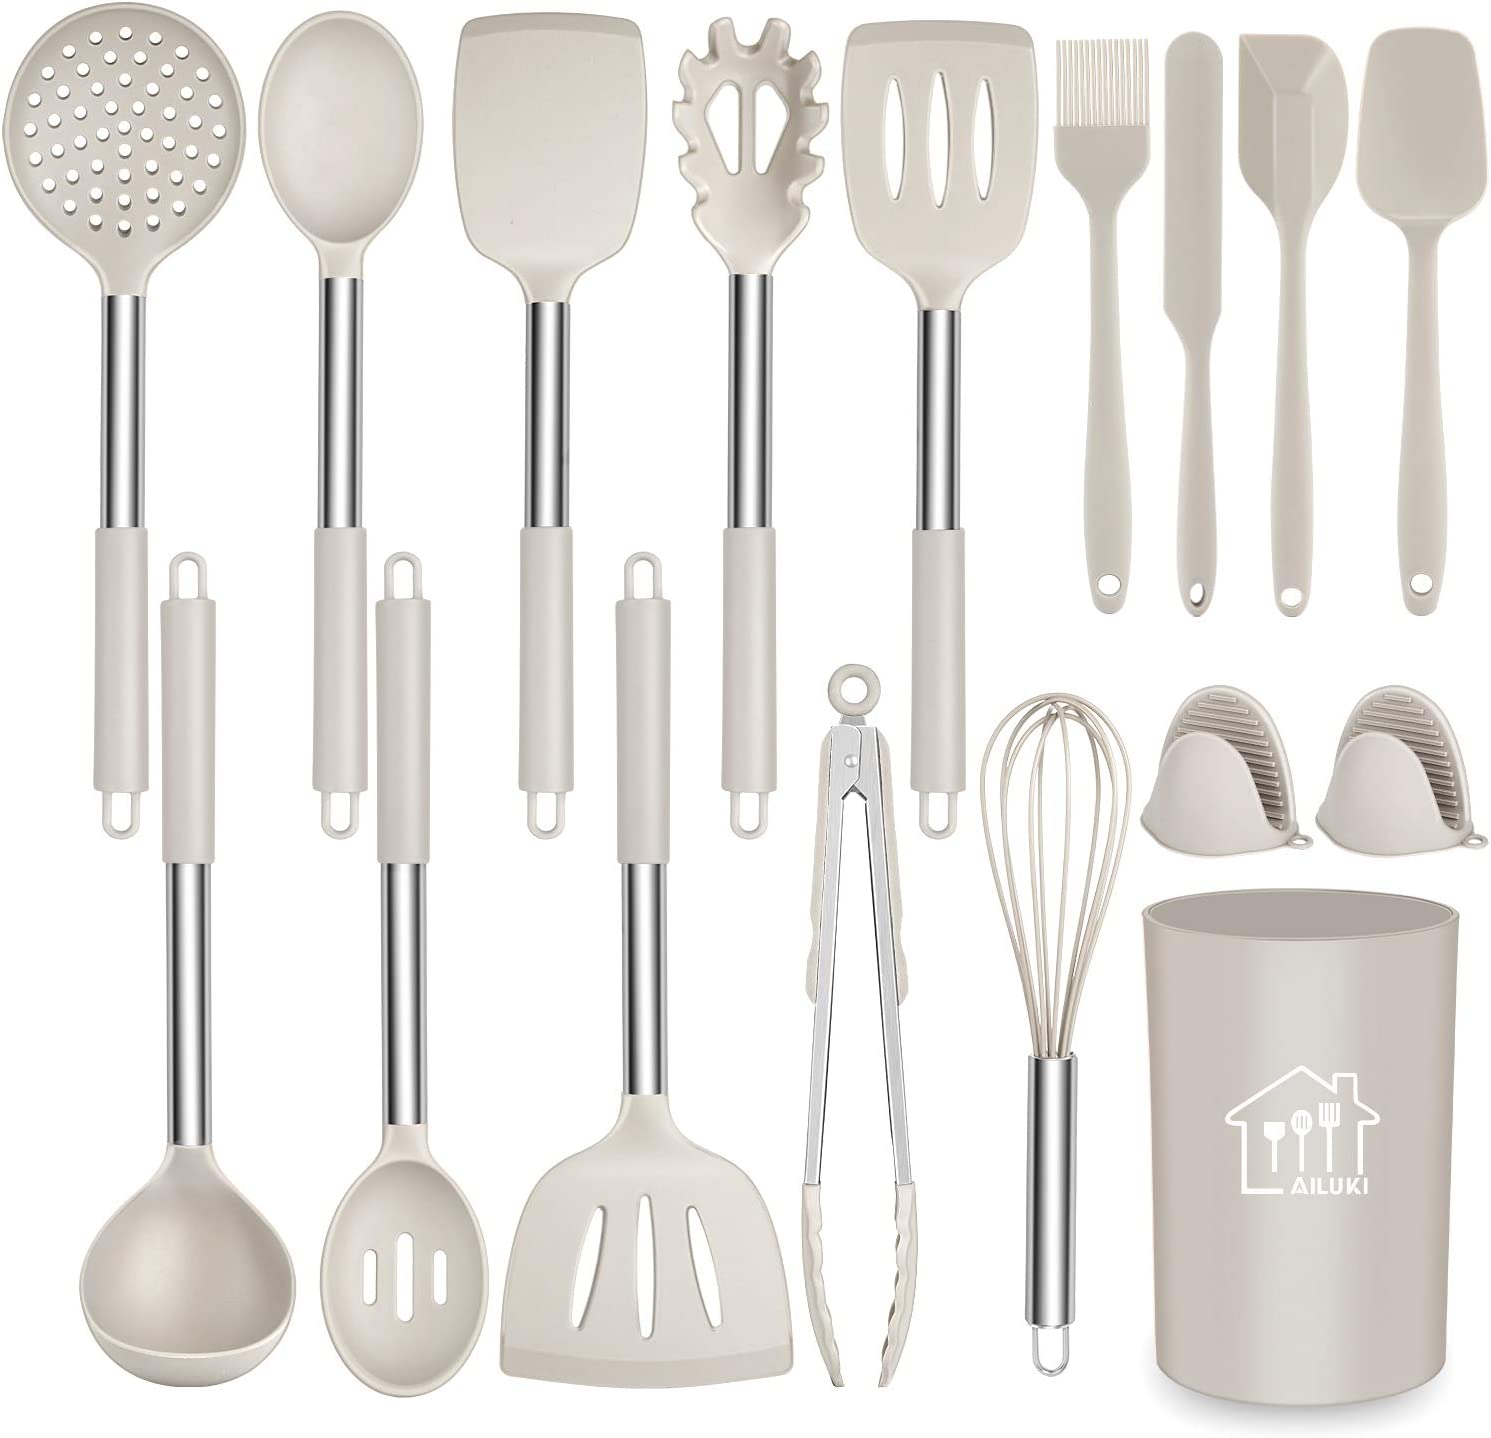 Ailuki Silicone Cooking Utensil Set,Kitchen Utensils 17 Pcs Cooking Utensils Set,Non-Stick Heat Resistant Silicone,Cookware with Stainless Steel